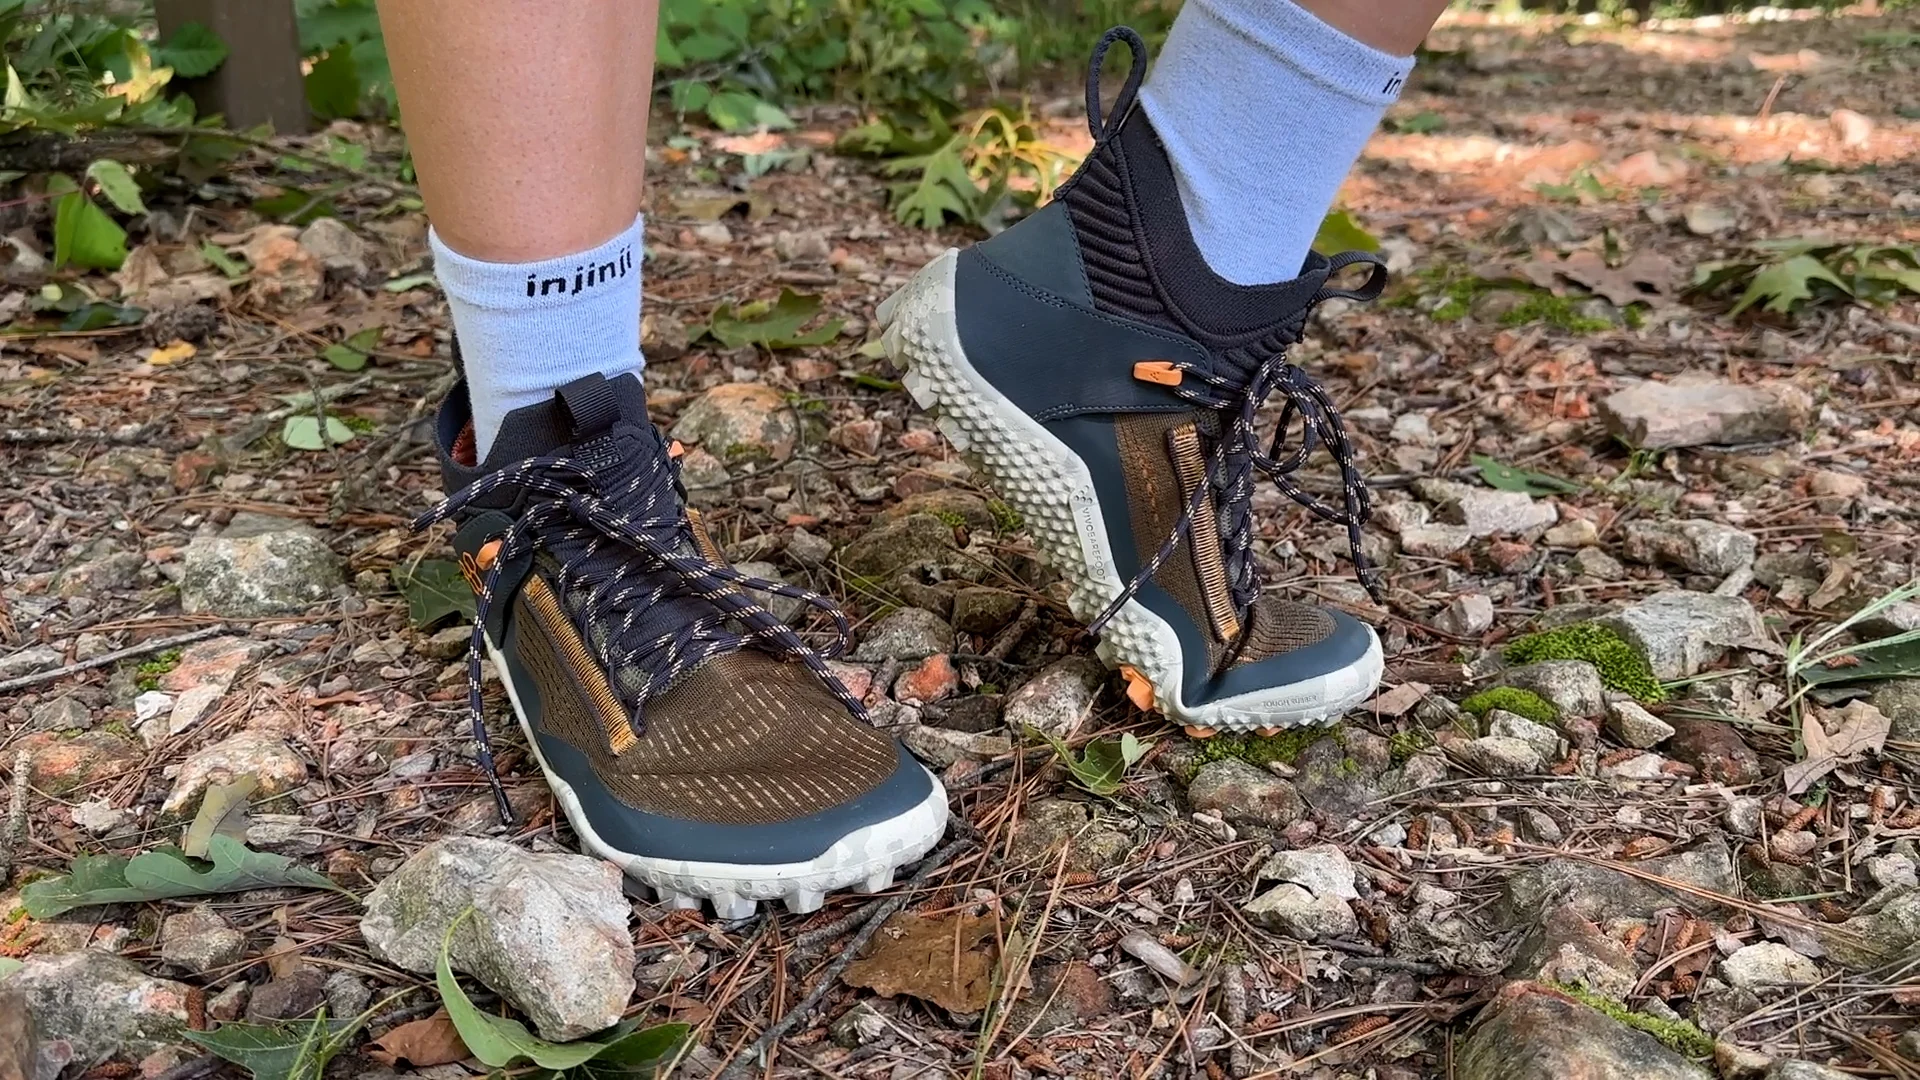 The Beginner's Guide to Buying Hiking Boots - How to Fit Hiking Boots